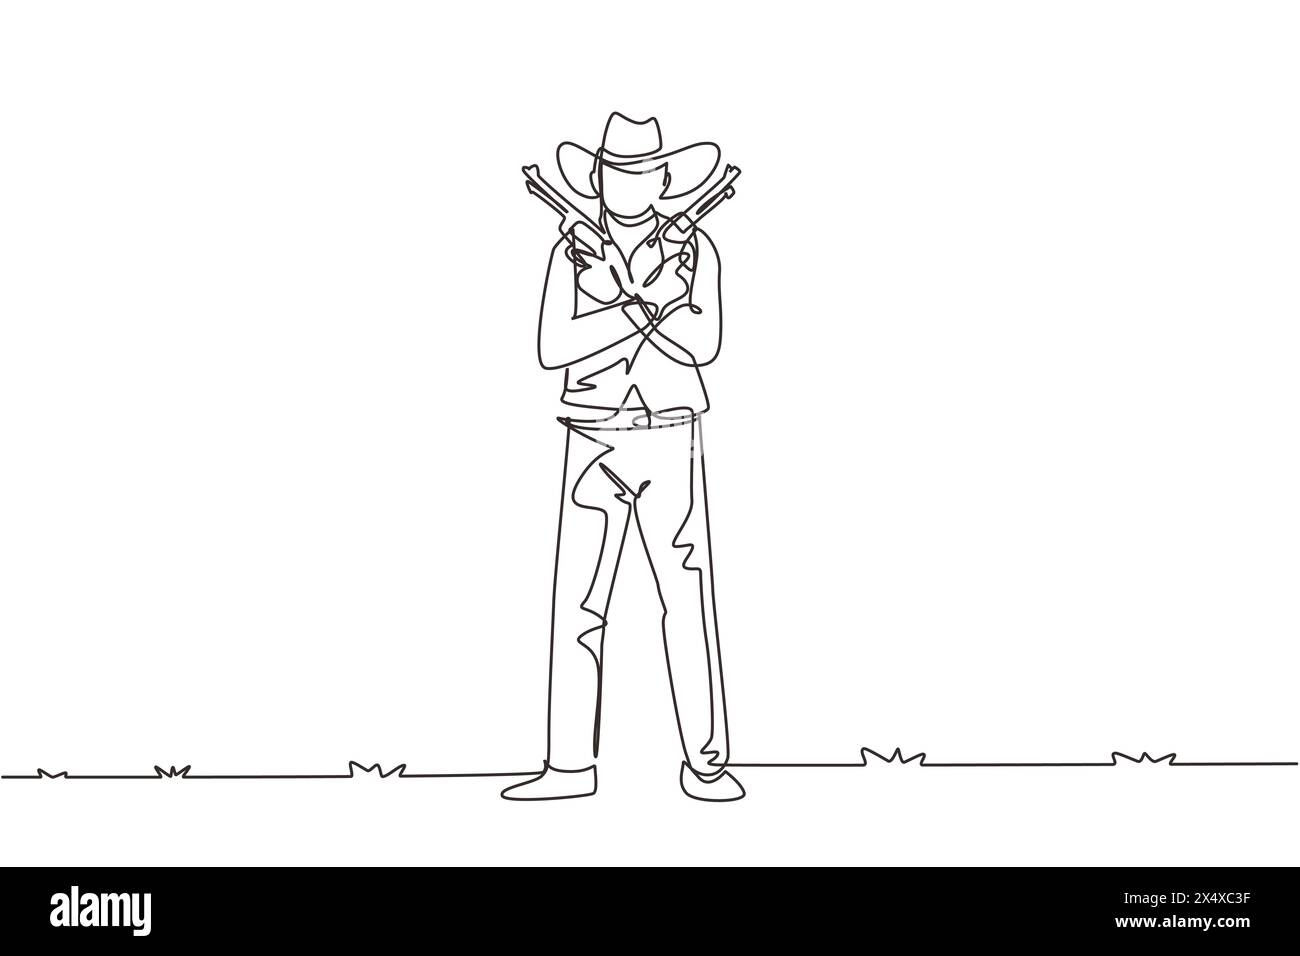 Single one line drawing wild west gunslinger holding two guns. American cowboys holding his two weapons above his chest. Weapons for self-defense. Mod Stock Vector